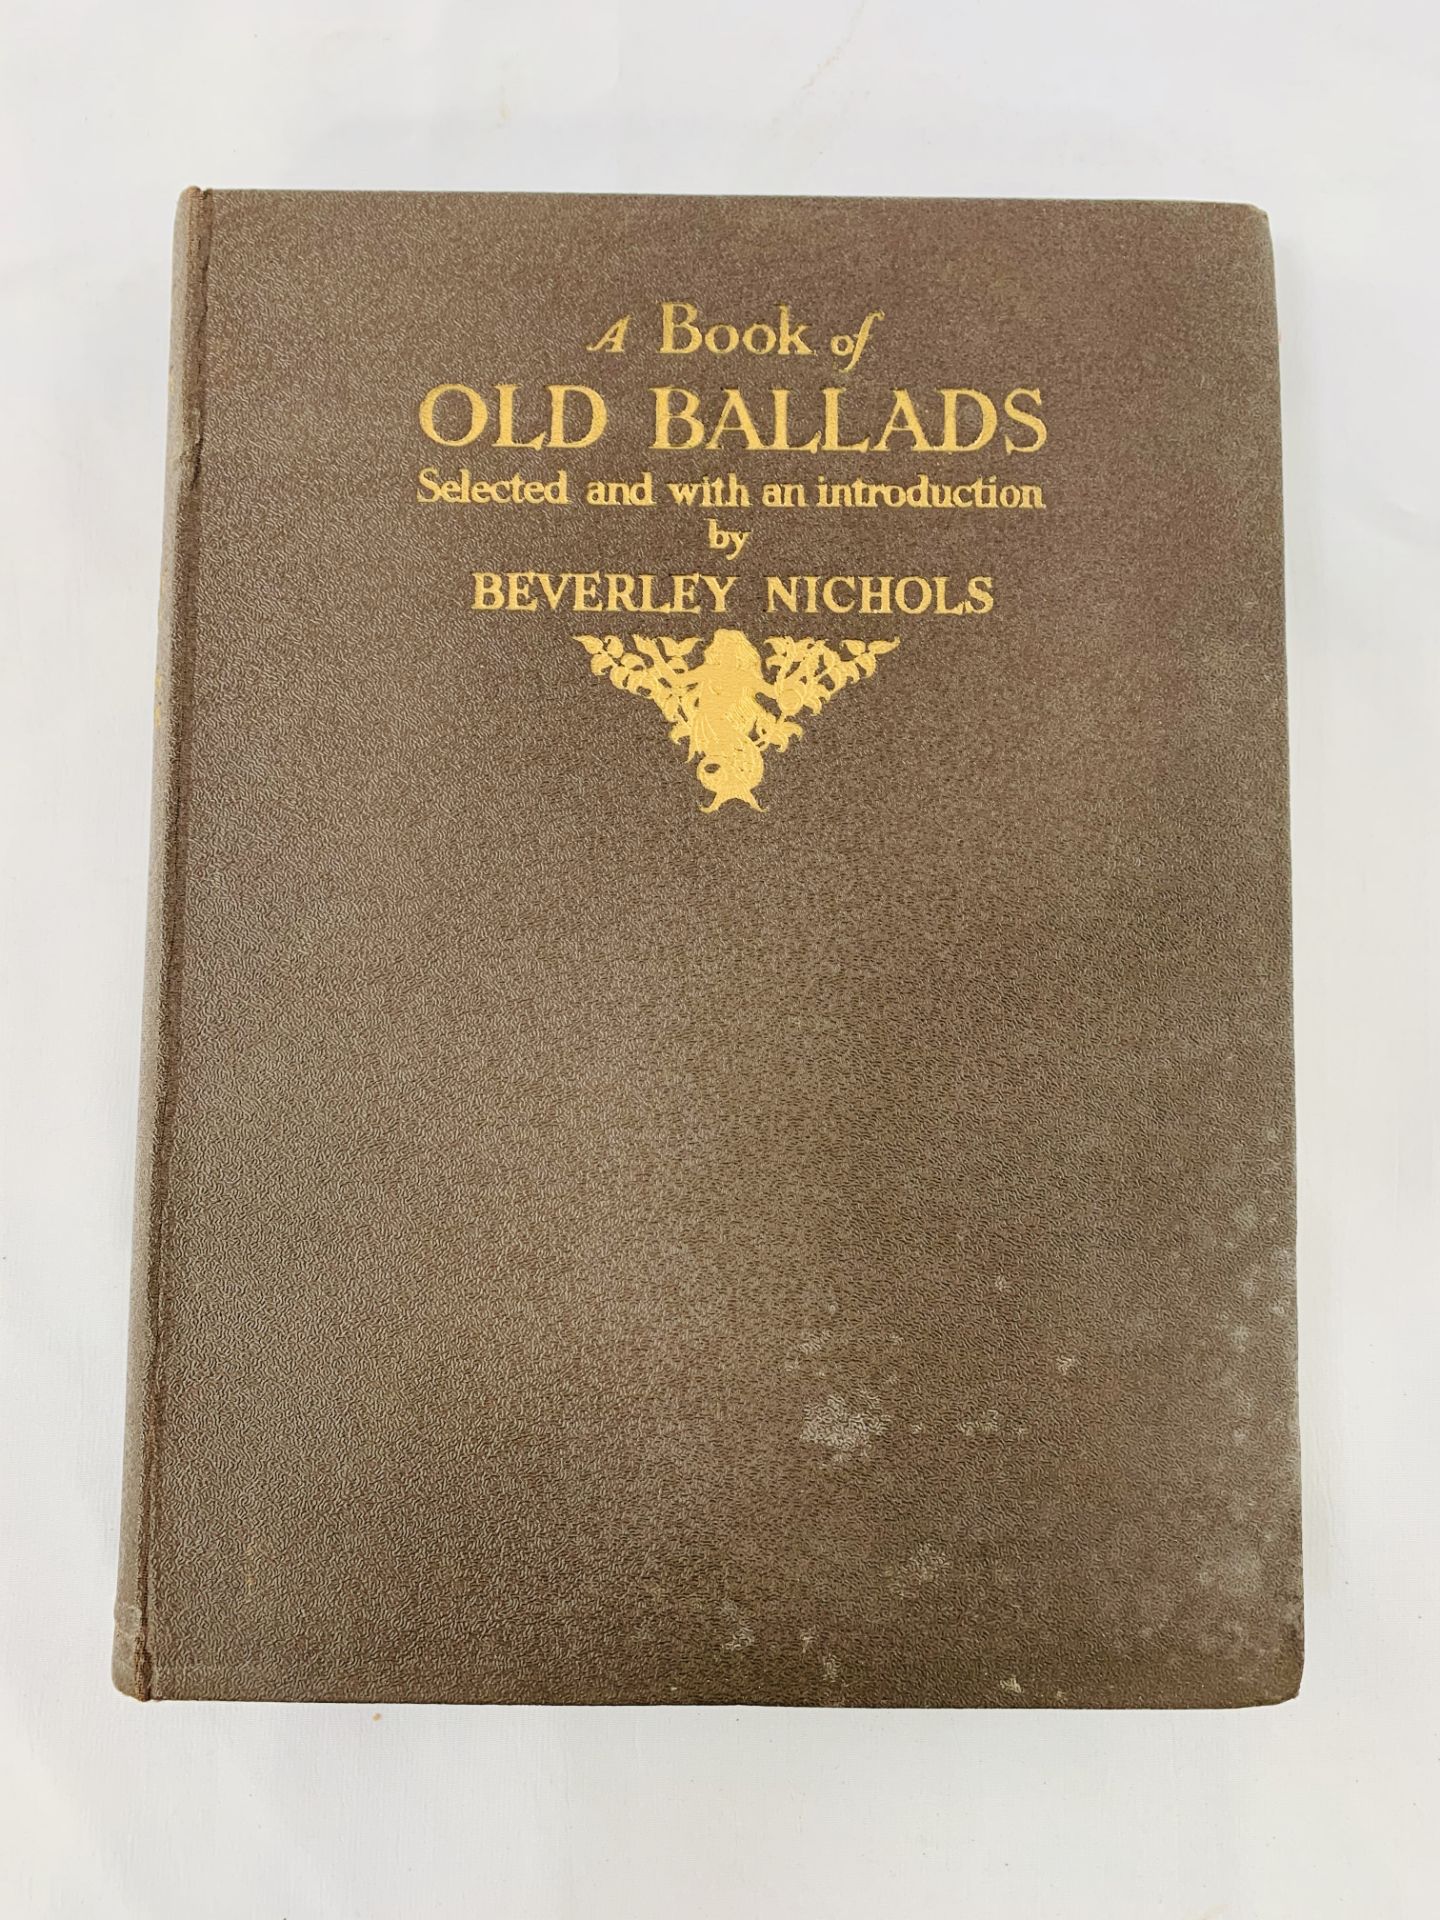 Book of Old Ballads selected and with an introduction by Beverley Nichols, published in 1934.